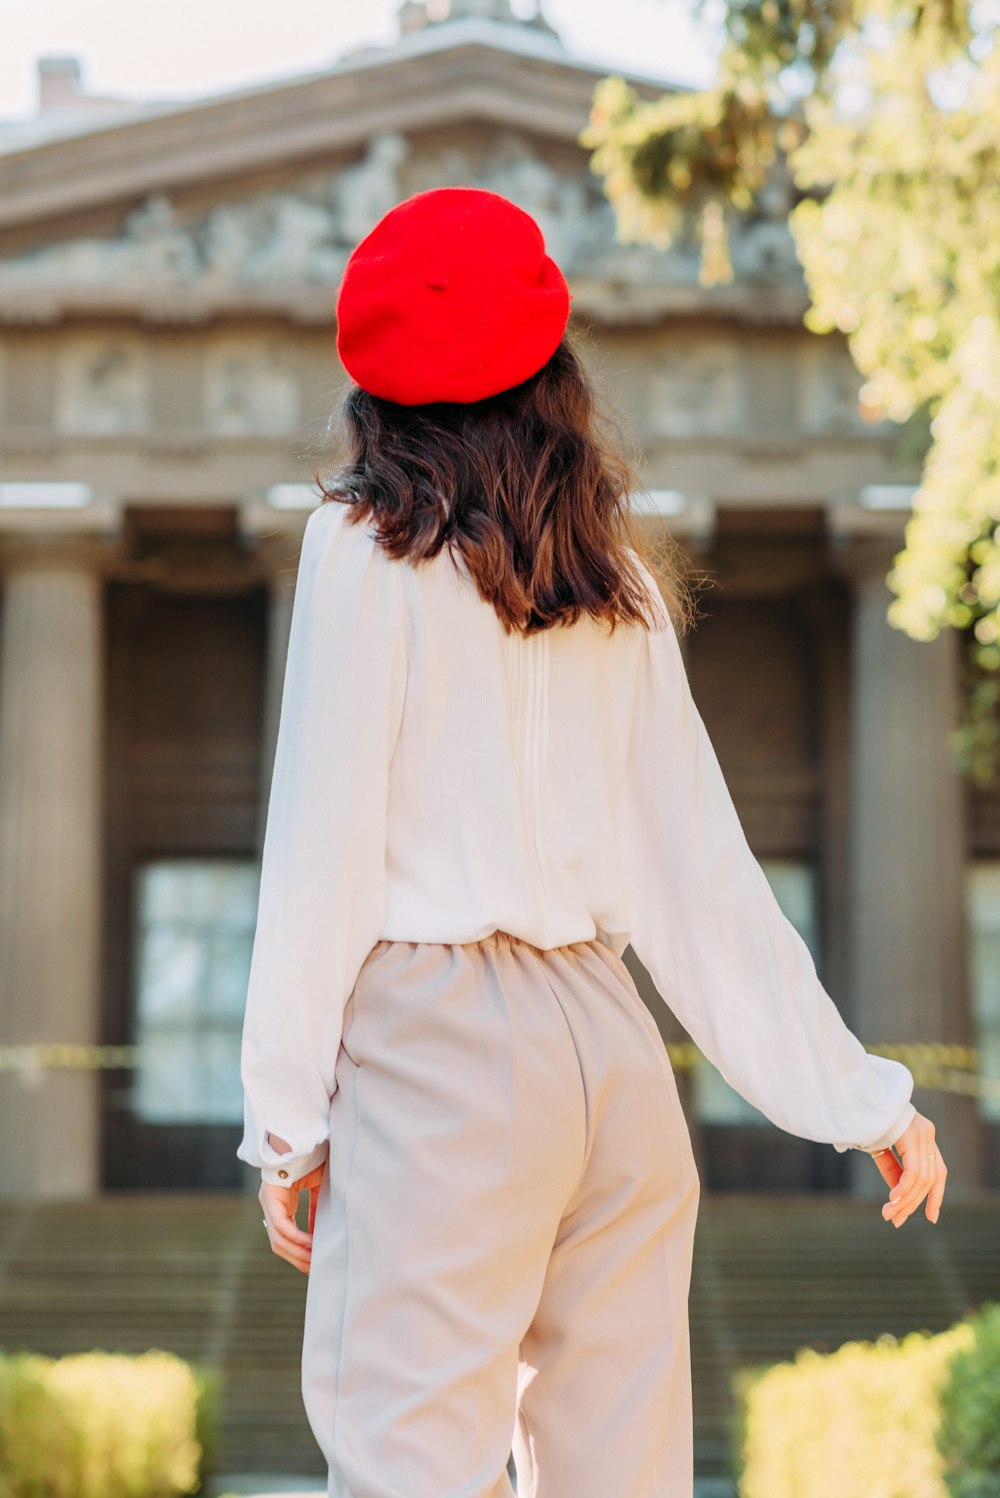 woman in white long sleeve shirt and red knit cap standing